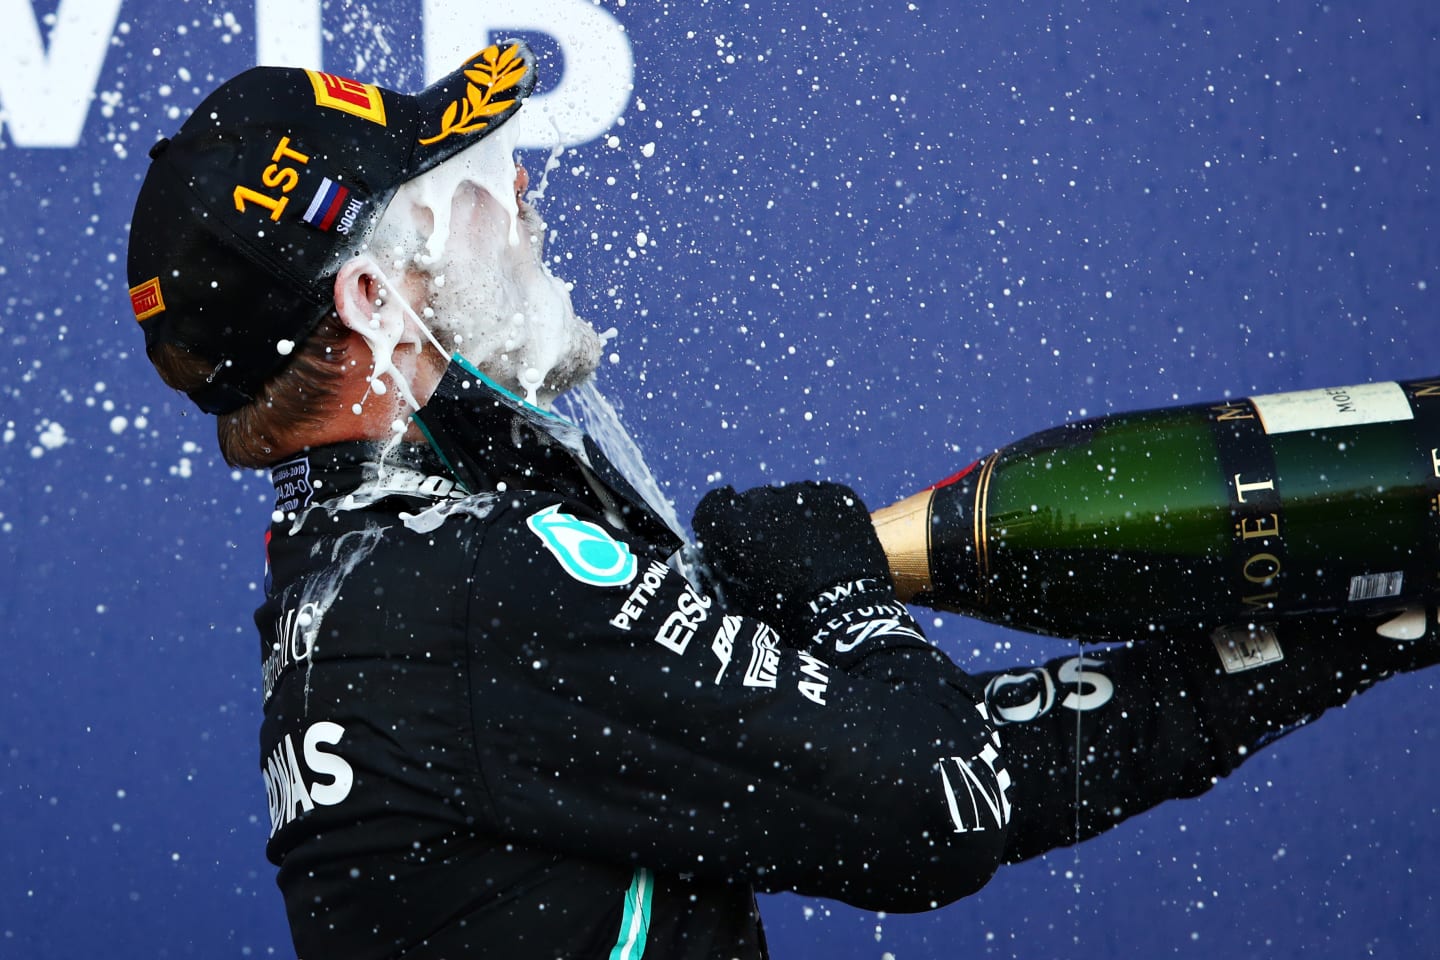 SOCHI, RUSSIA - SEPTEMBER 27: Race winner Valtteri Bottas of Finland and Mercedes GP celebrates on the podium during the F1 Grand Prix of Russia at Sochi Autodrom on September 27, 2020 in Sochi, Russia. (Photo by Mark Thompson/Getty Images)